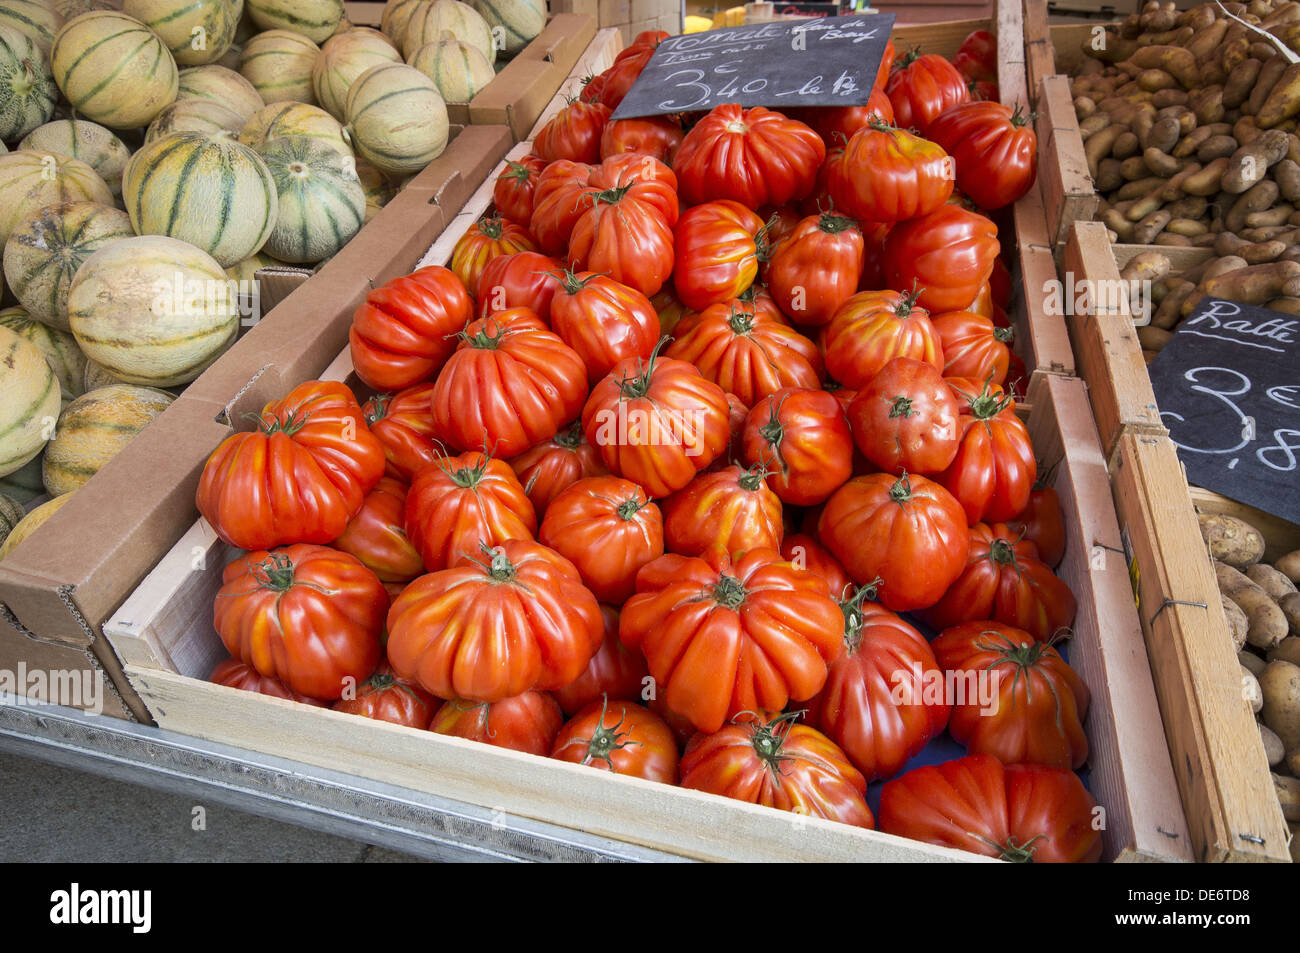 Grandmas pick tomatoes on sale at the sunday market on the streets of Le Puy-en-Velay in Auvergne region of France Stock Photo